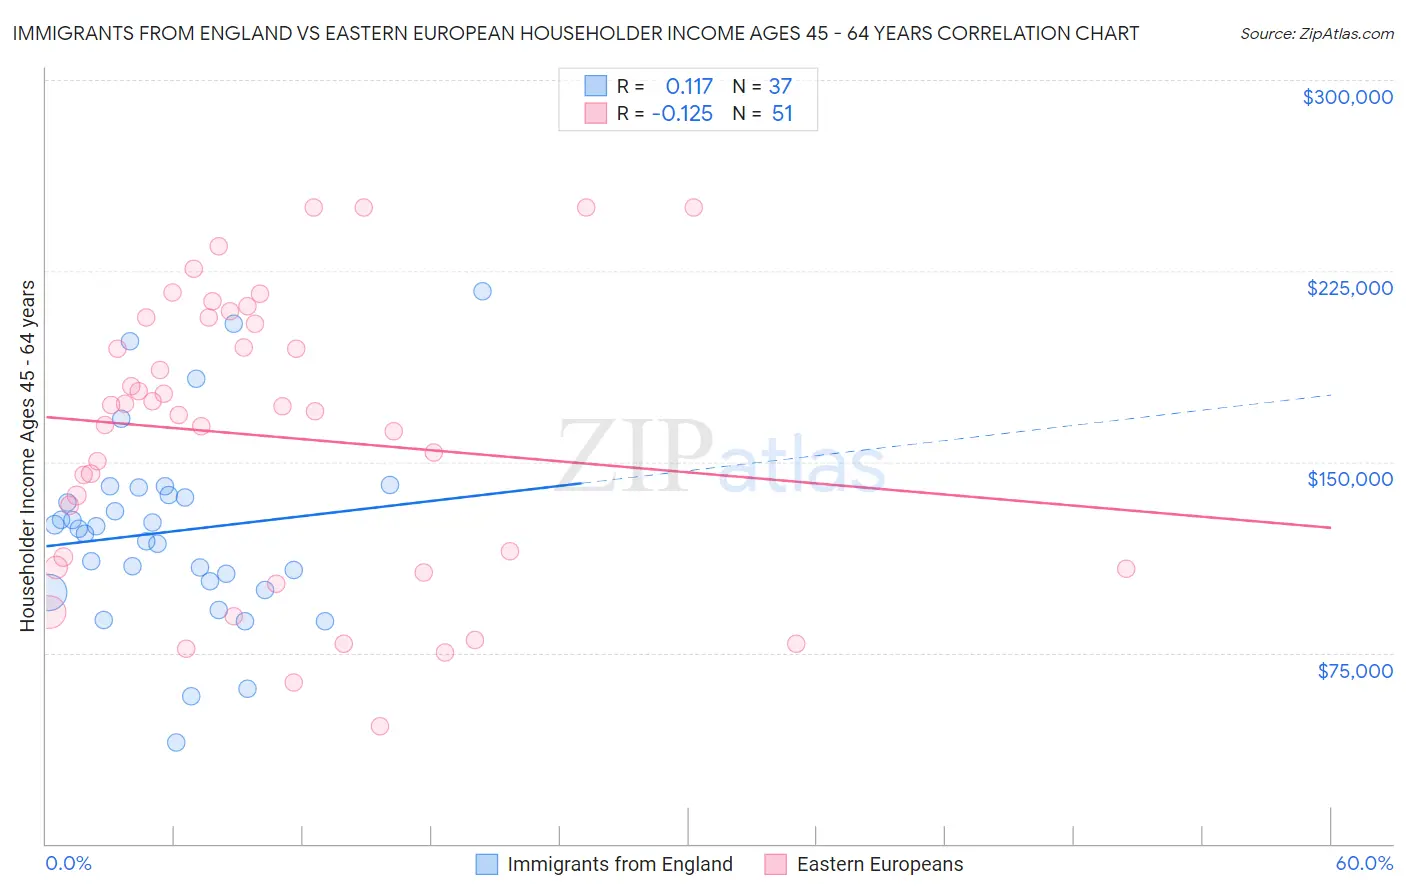 Immigrants from England vs Eastern European Householder Income Ages 45 - 64 years